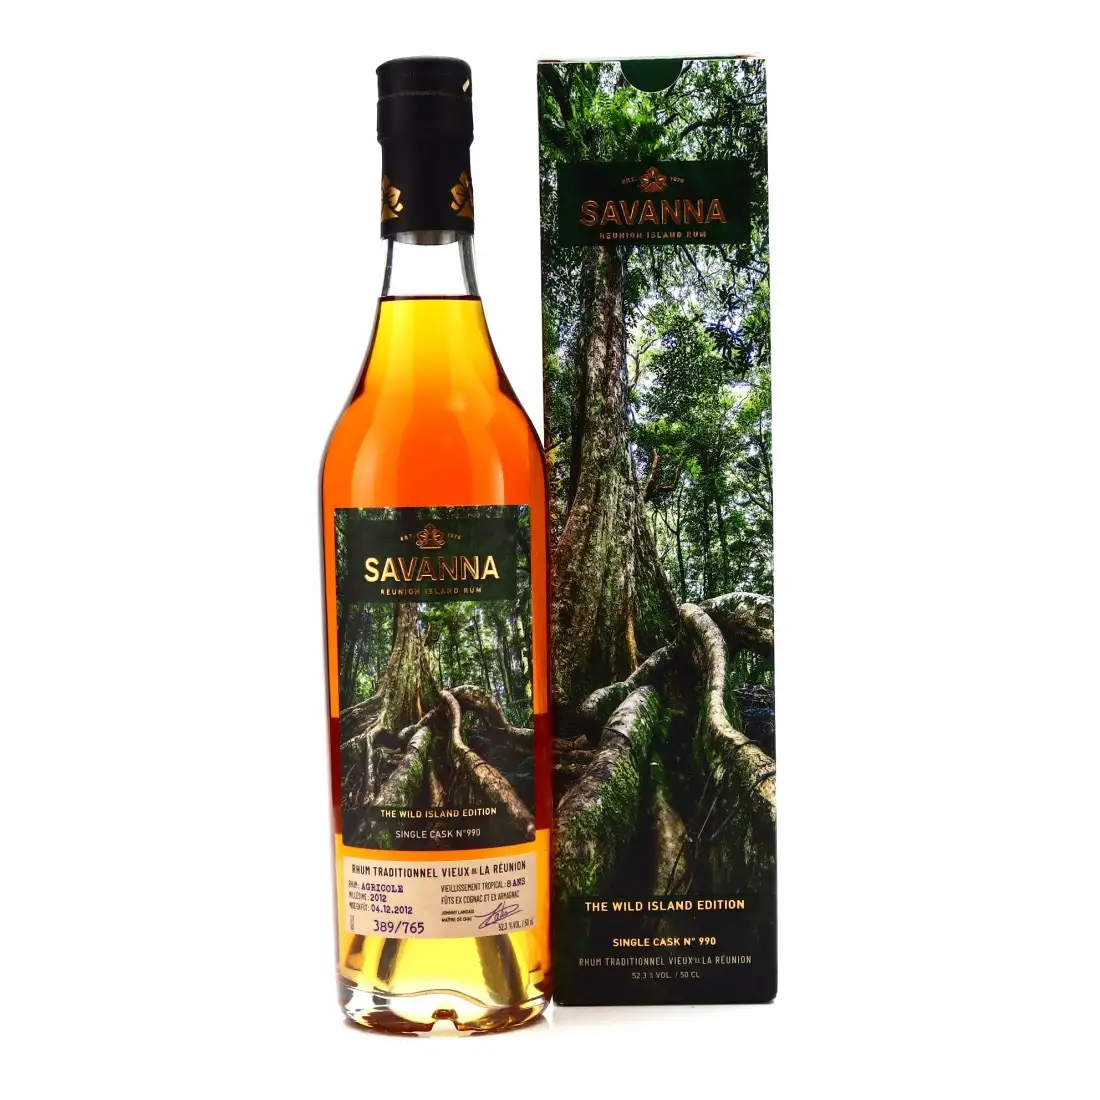 Image of the front of the bottle of the rum The Wild Island Edition - Arbre